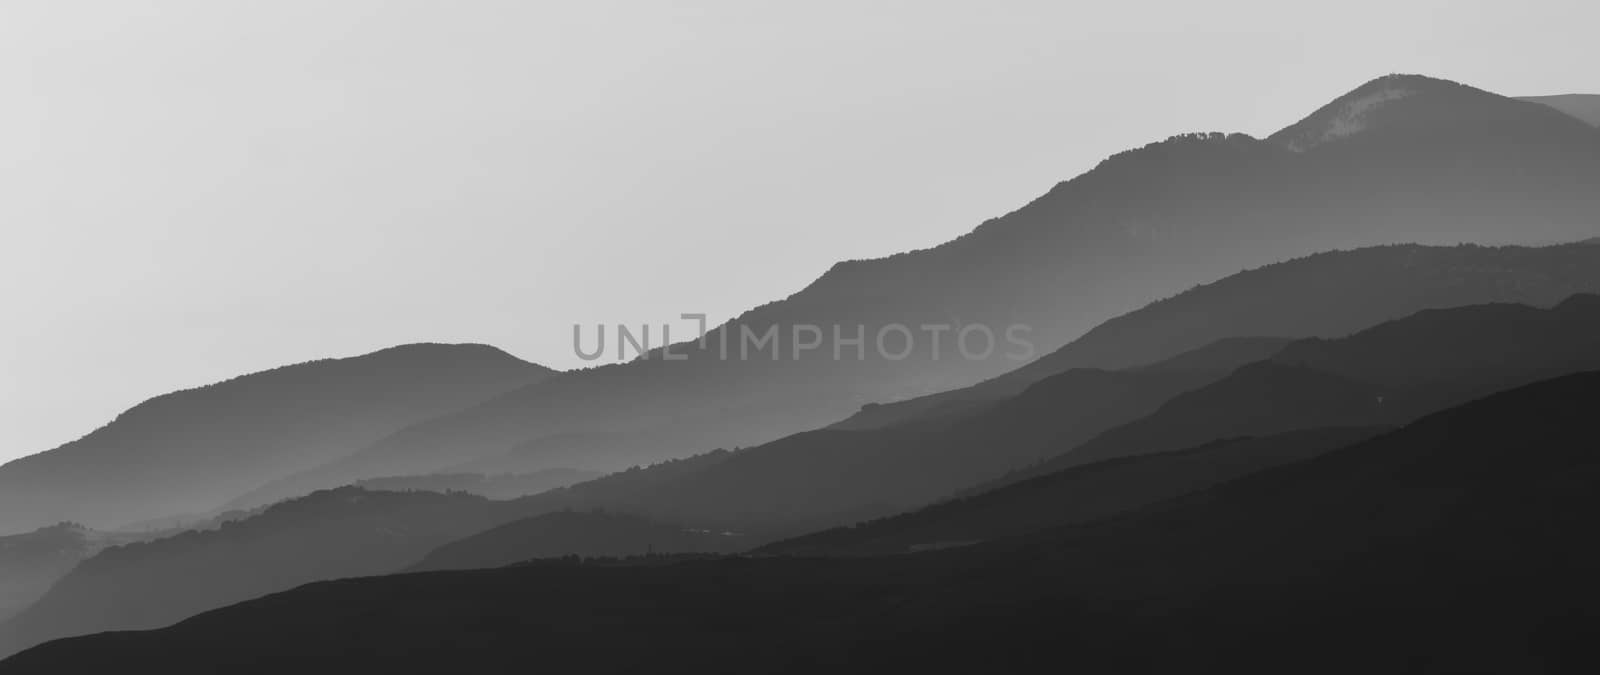 Silhouette of mountains of Spain in black and white